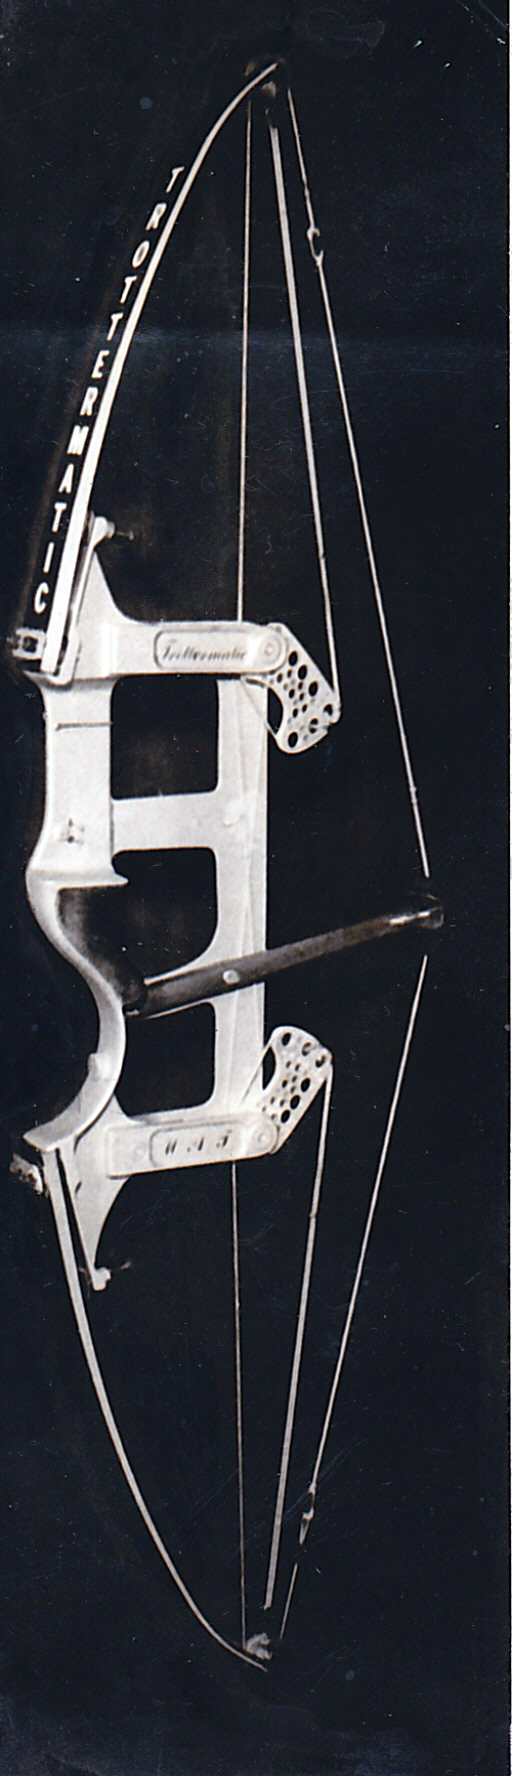 Trottermatic Compound Bow 1977